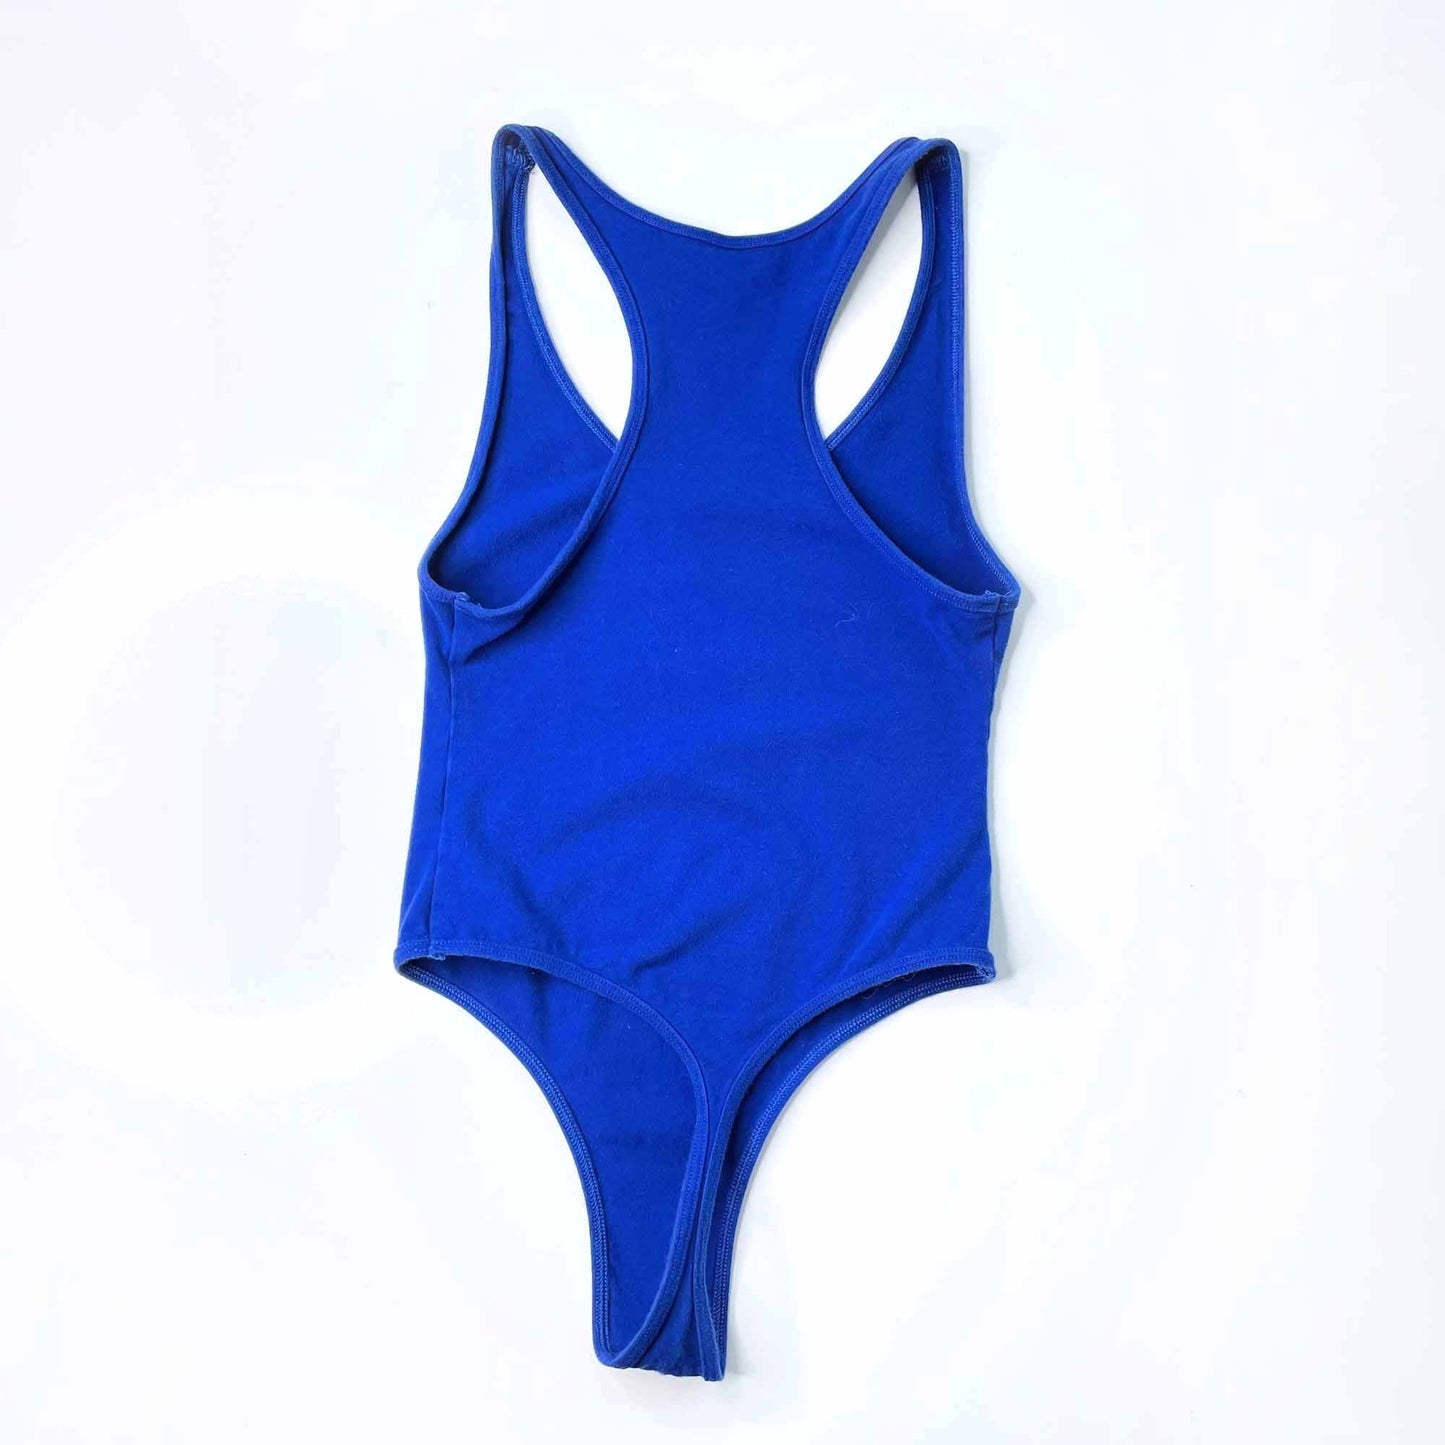 american apparel thong bodysuit - size small